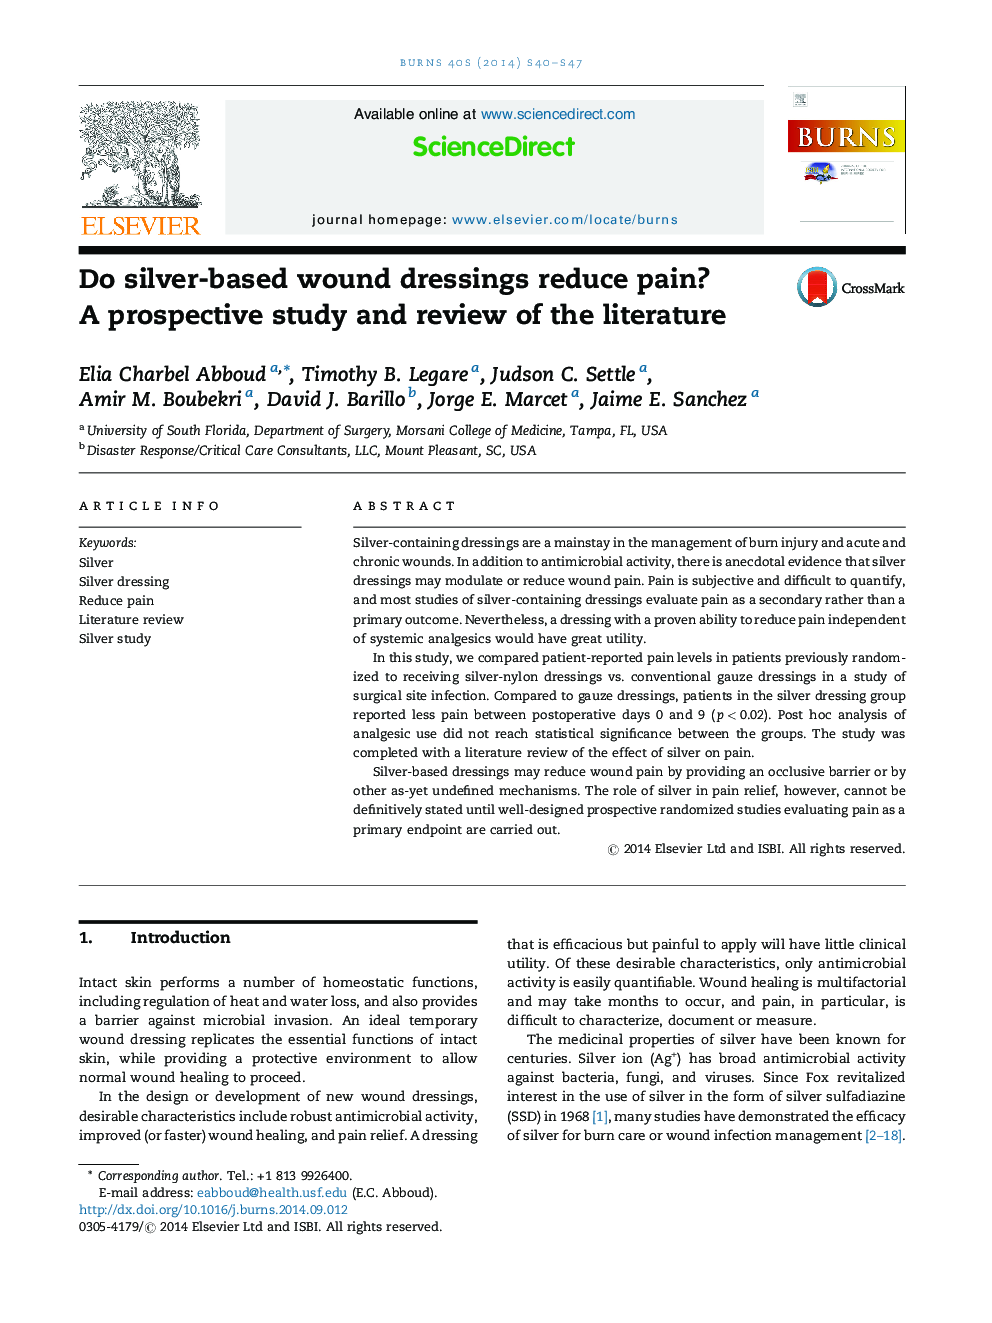 Do silver-based wound dressings reduce pain? A prospective study and review of the literature